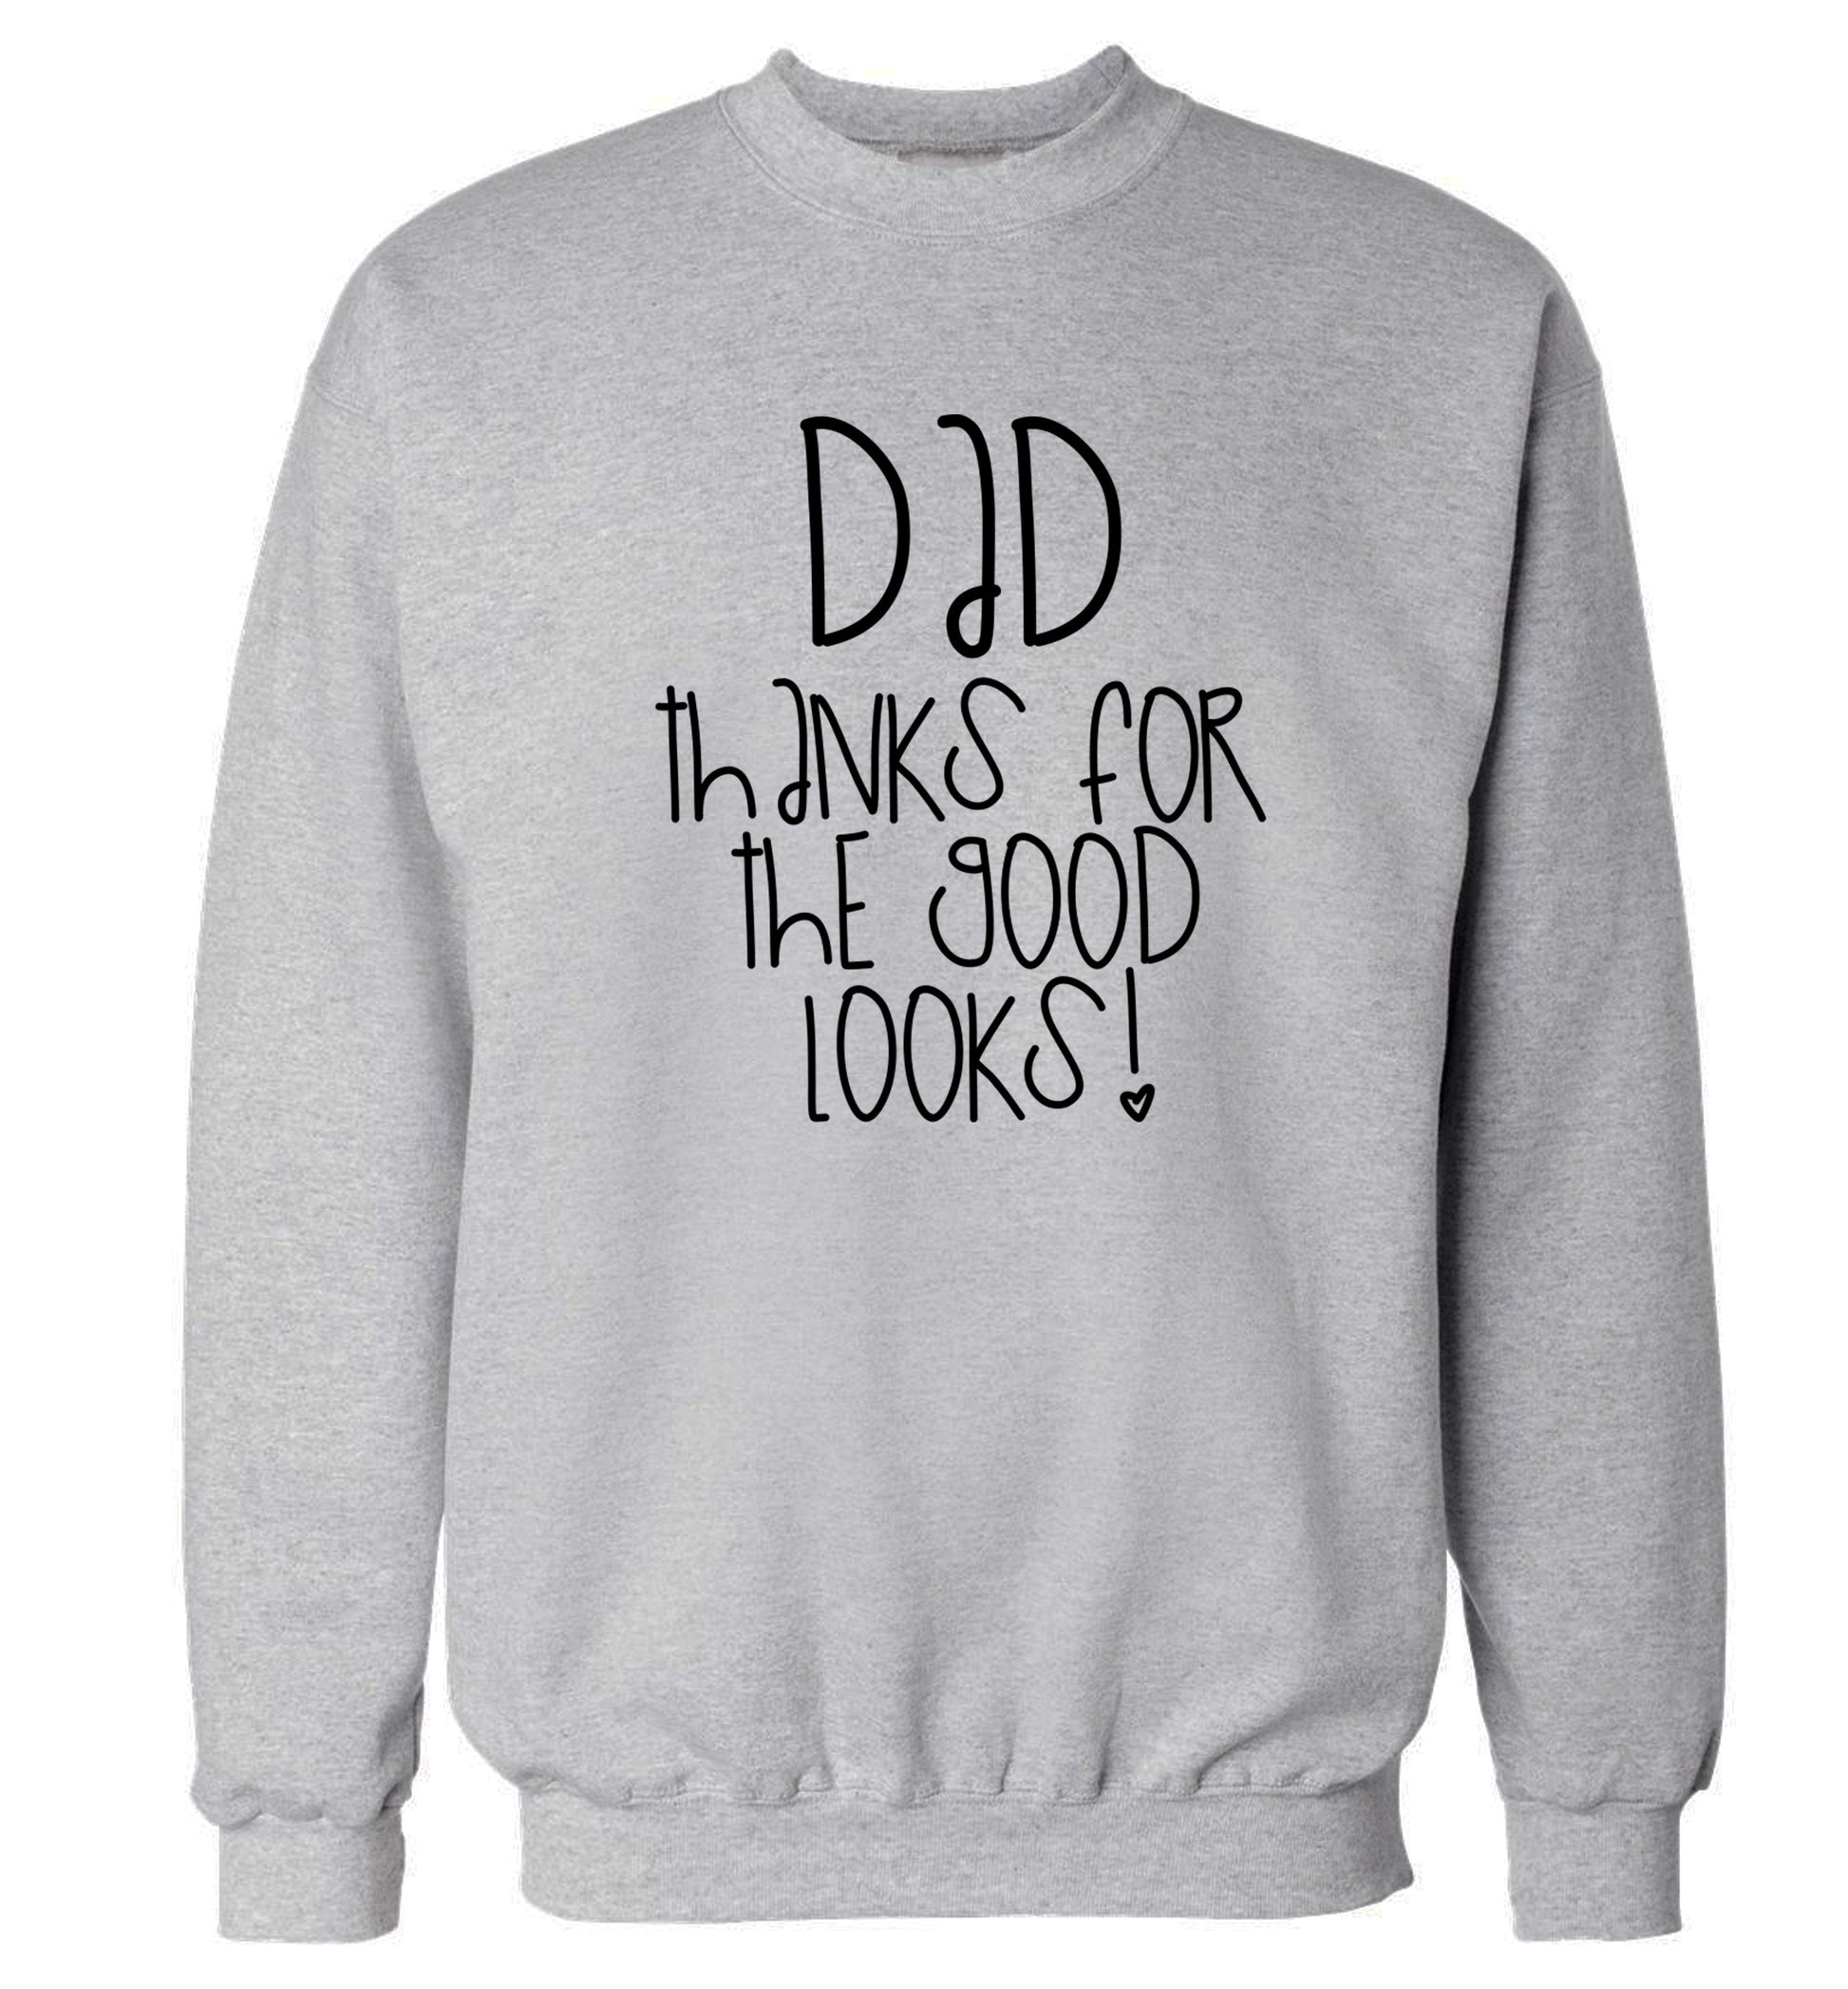 Dad thanks for the good looks Adult's unisex grey Sweater 2XL